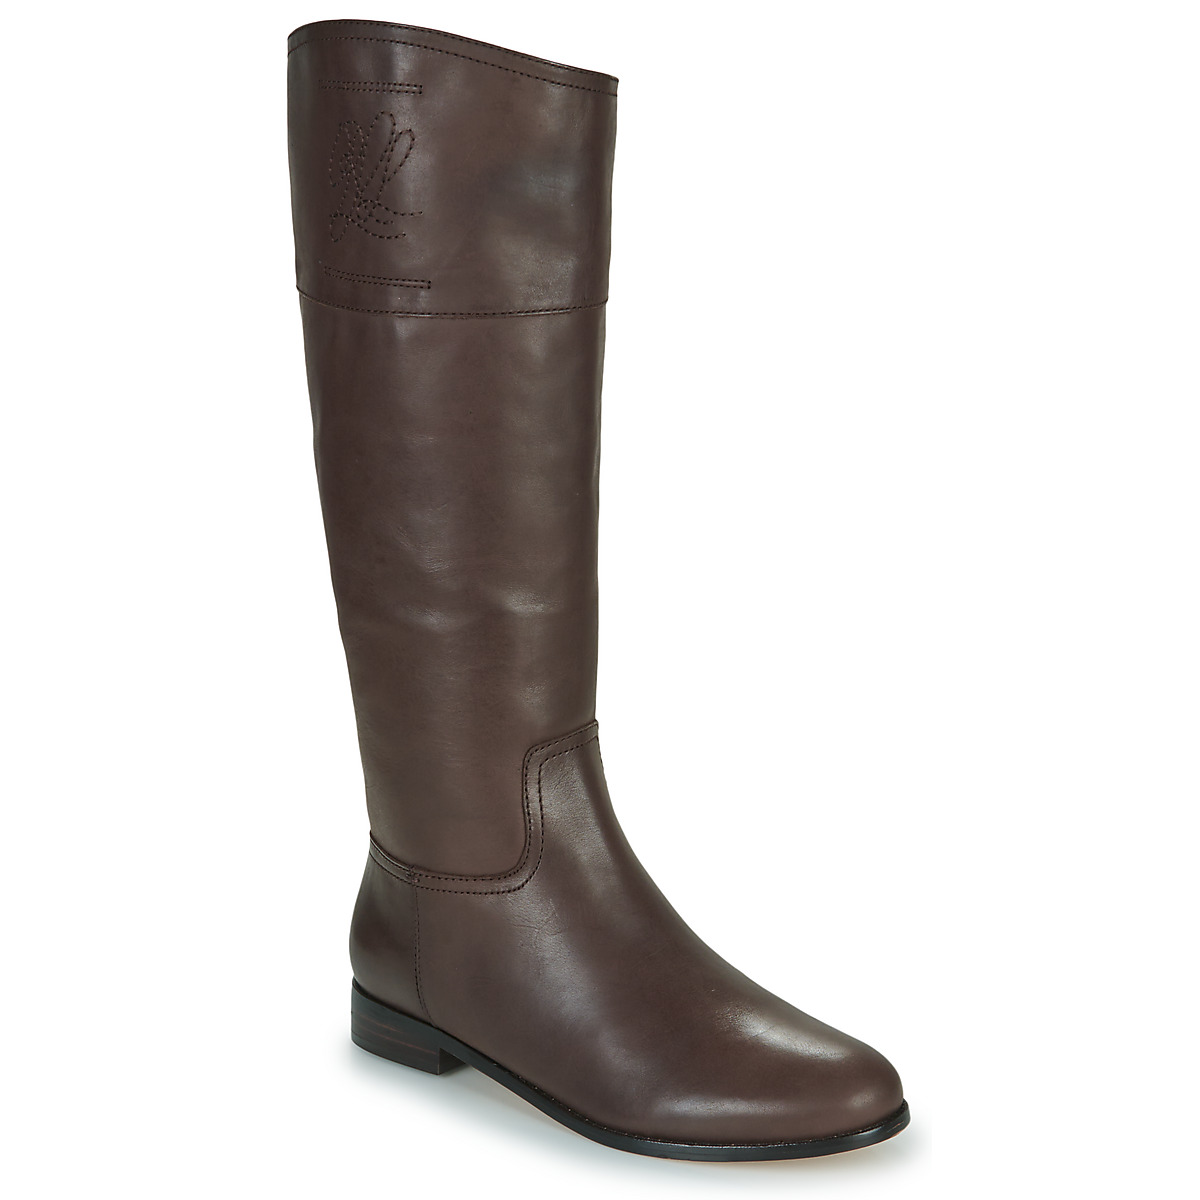 Chaussures Femme The shoe introduced the JUSTINE-BOOTS-TALL BOOT Cognac